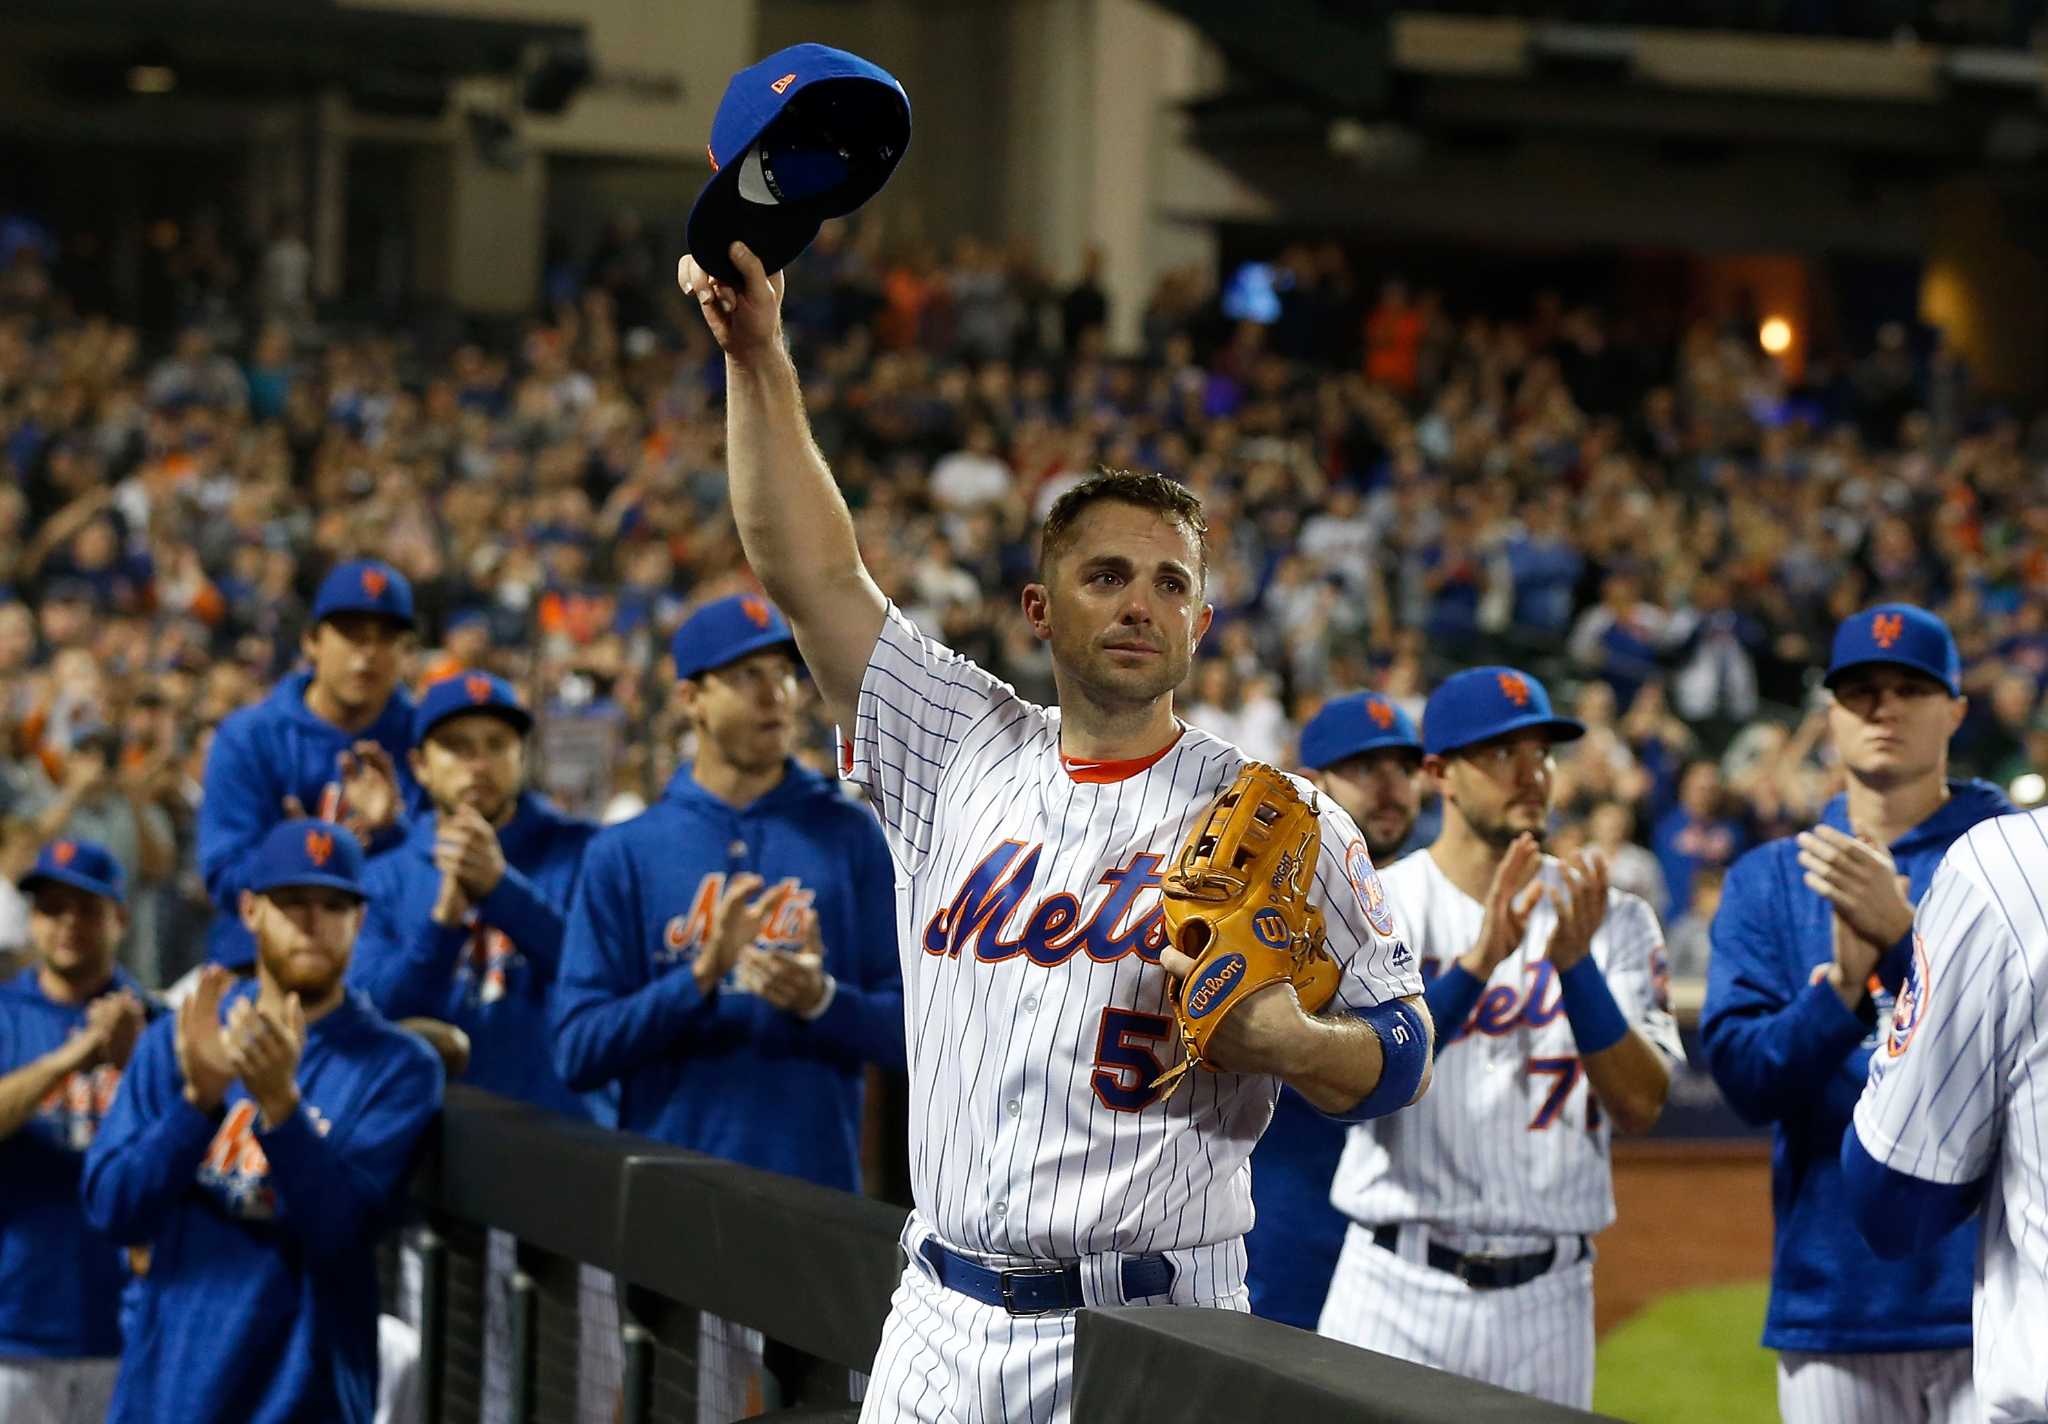 Top NYC spine doc says Mets' David Wright isn't done yet 